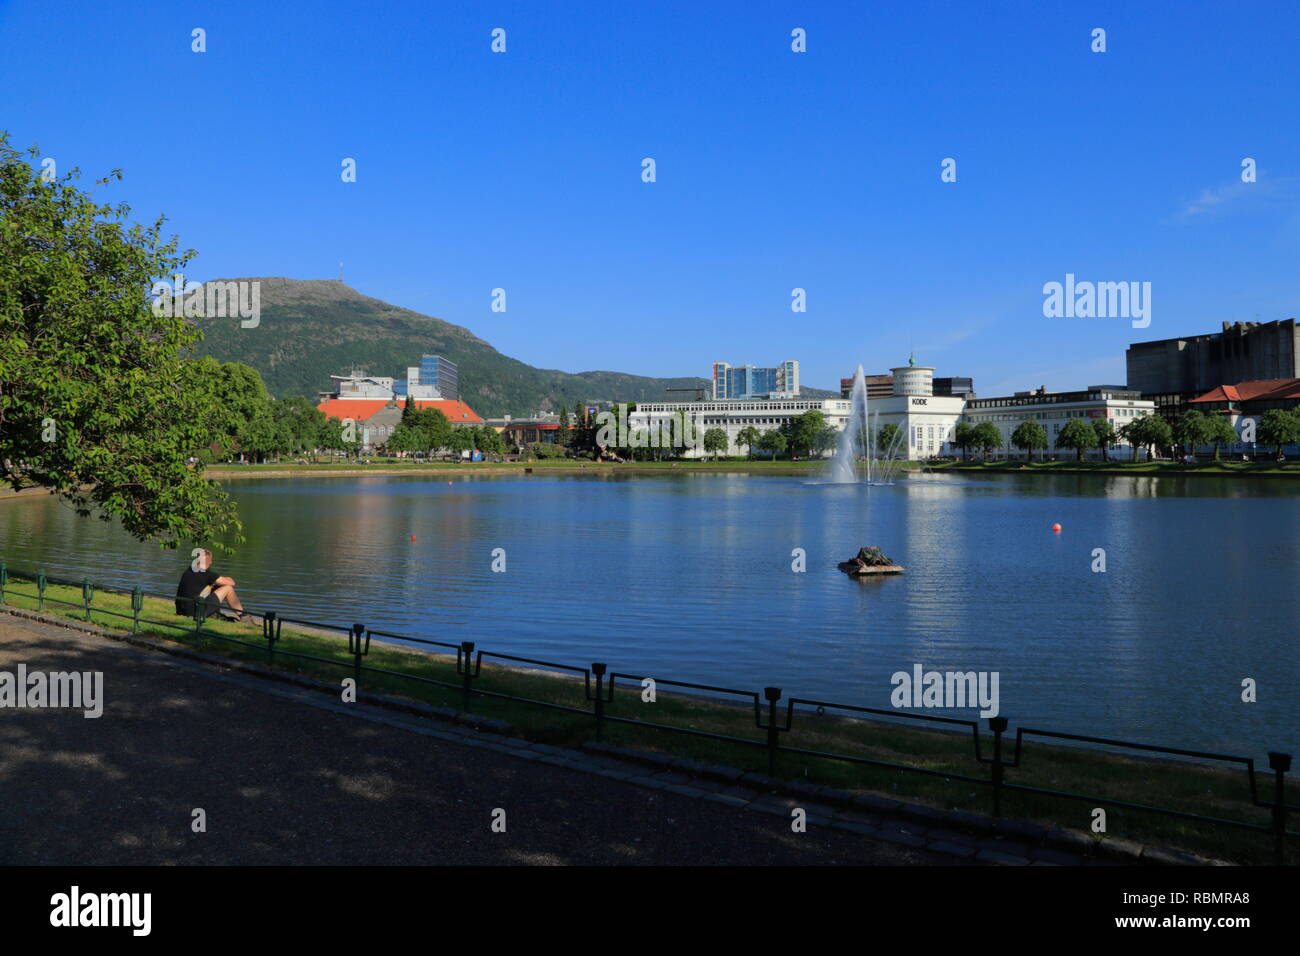 A man sits on the bank of the lake, Lille Lungegårdsvannet, in Bergen city, Norway, with a view of Mount Ulriken, KODE 4 and other buildings. Stock Photo